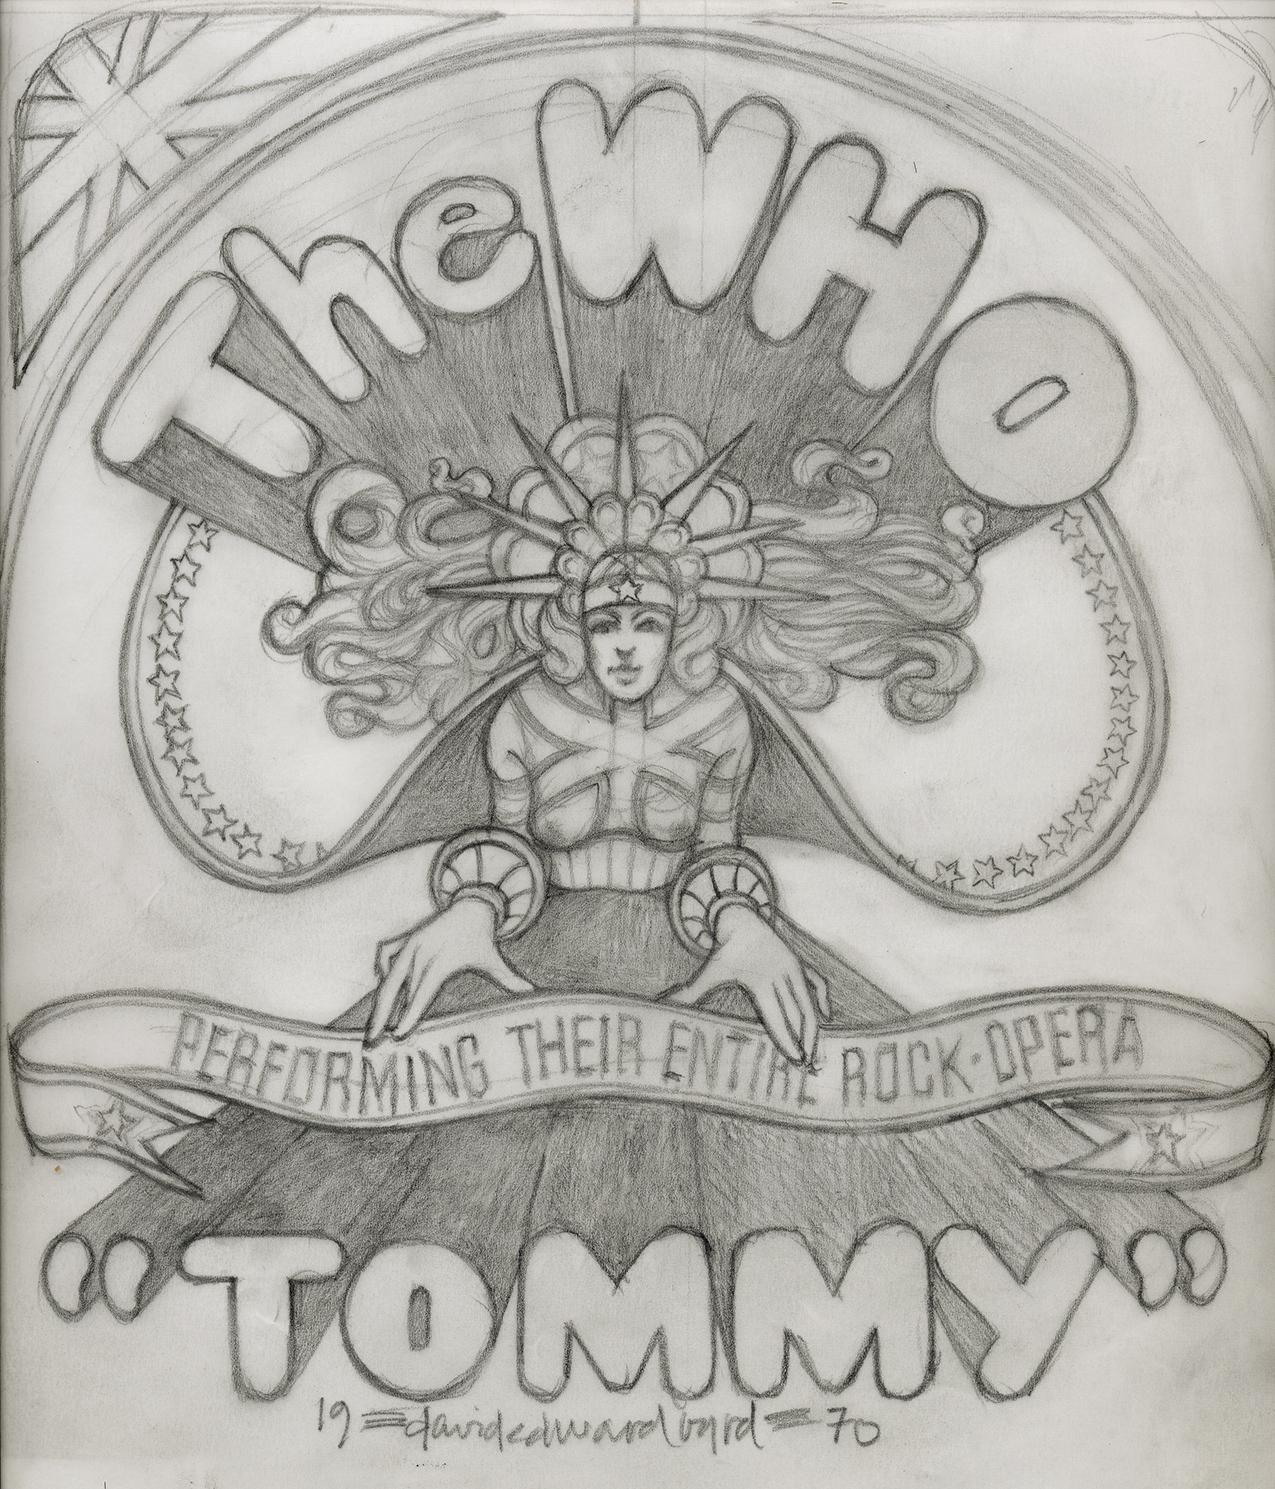 Original The WHO 1970 Tommy Fillmore East drawing  for their Tommy Poster art - Art by David Edward Byrd 